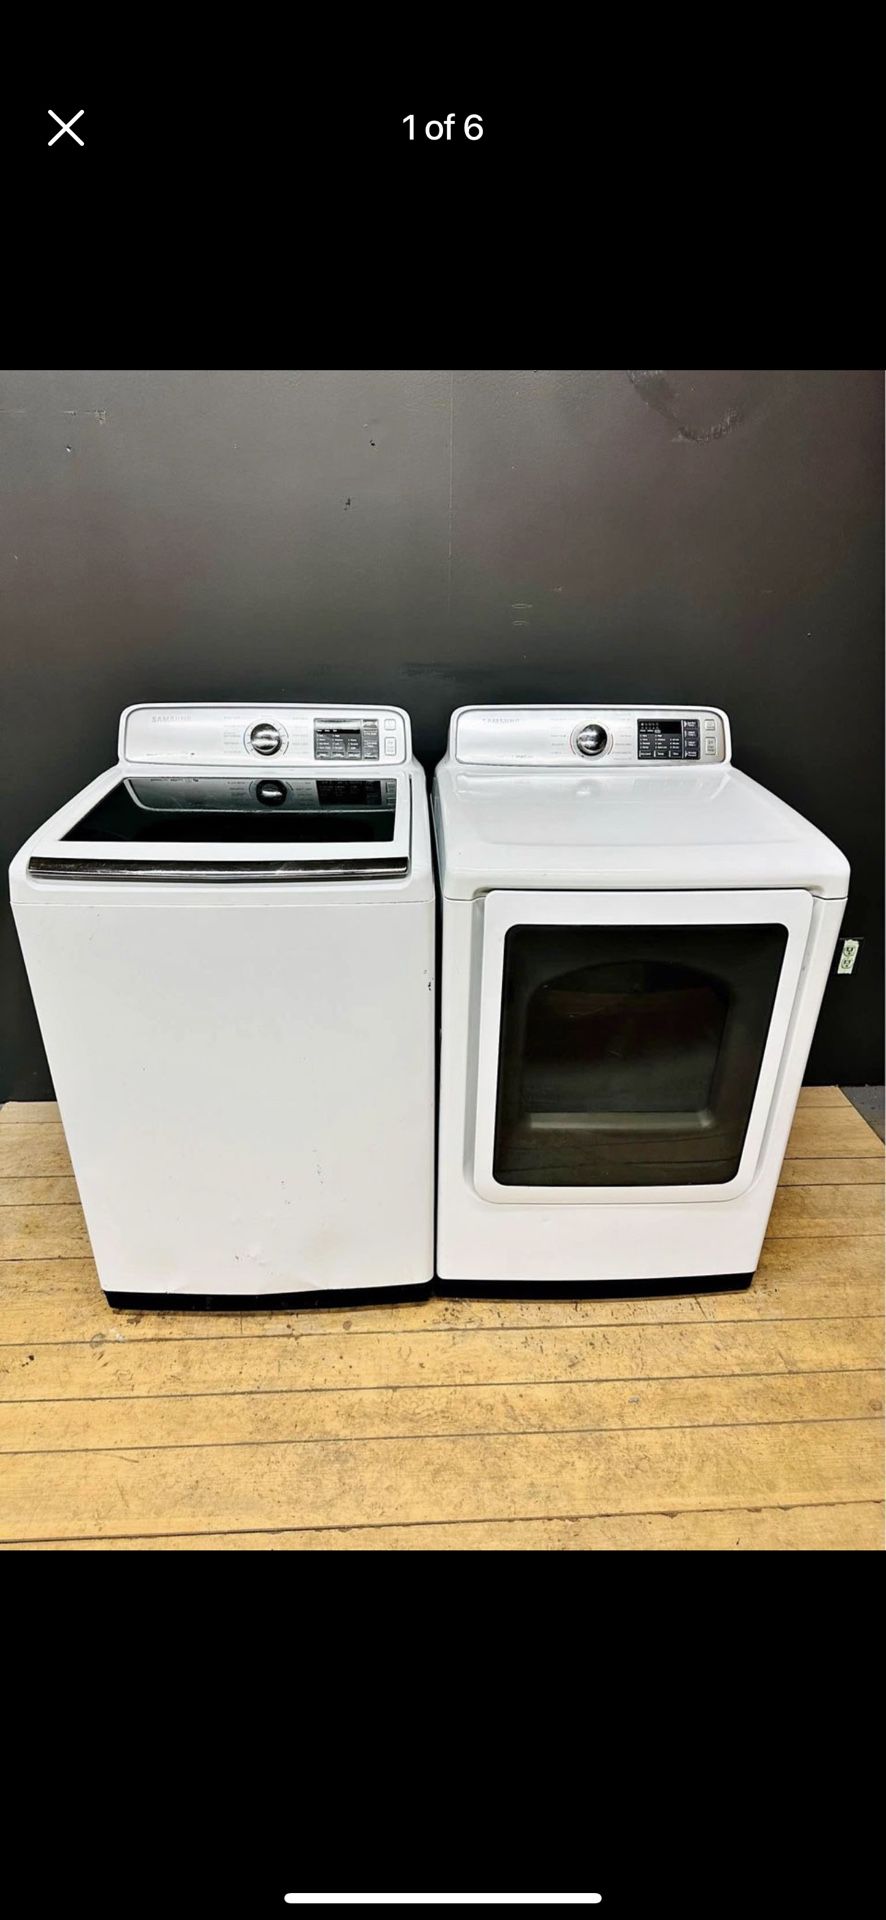 🏆🏆(LIKE NEW) XL Lg Top Load washer & matching electric dryer (delivery available)